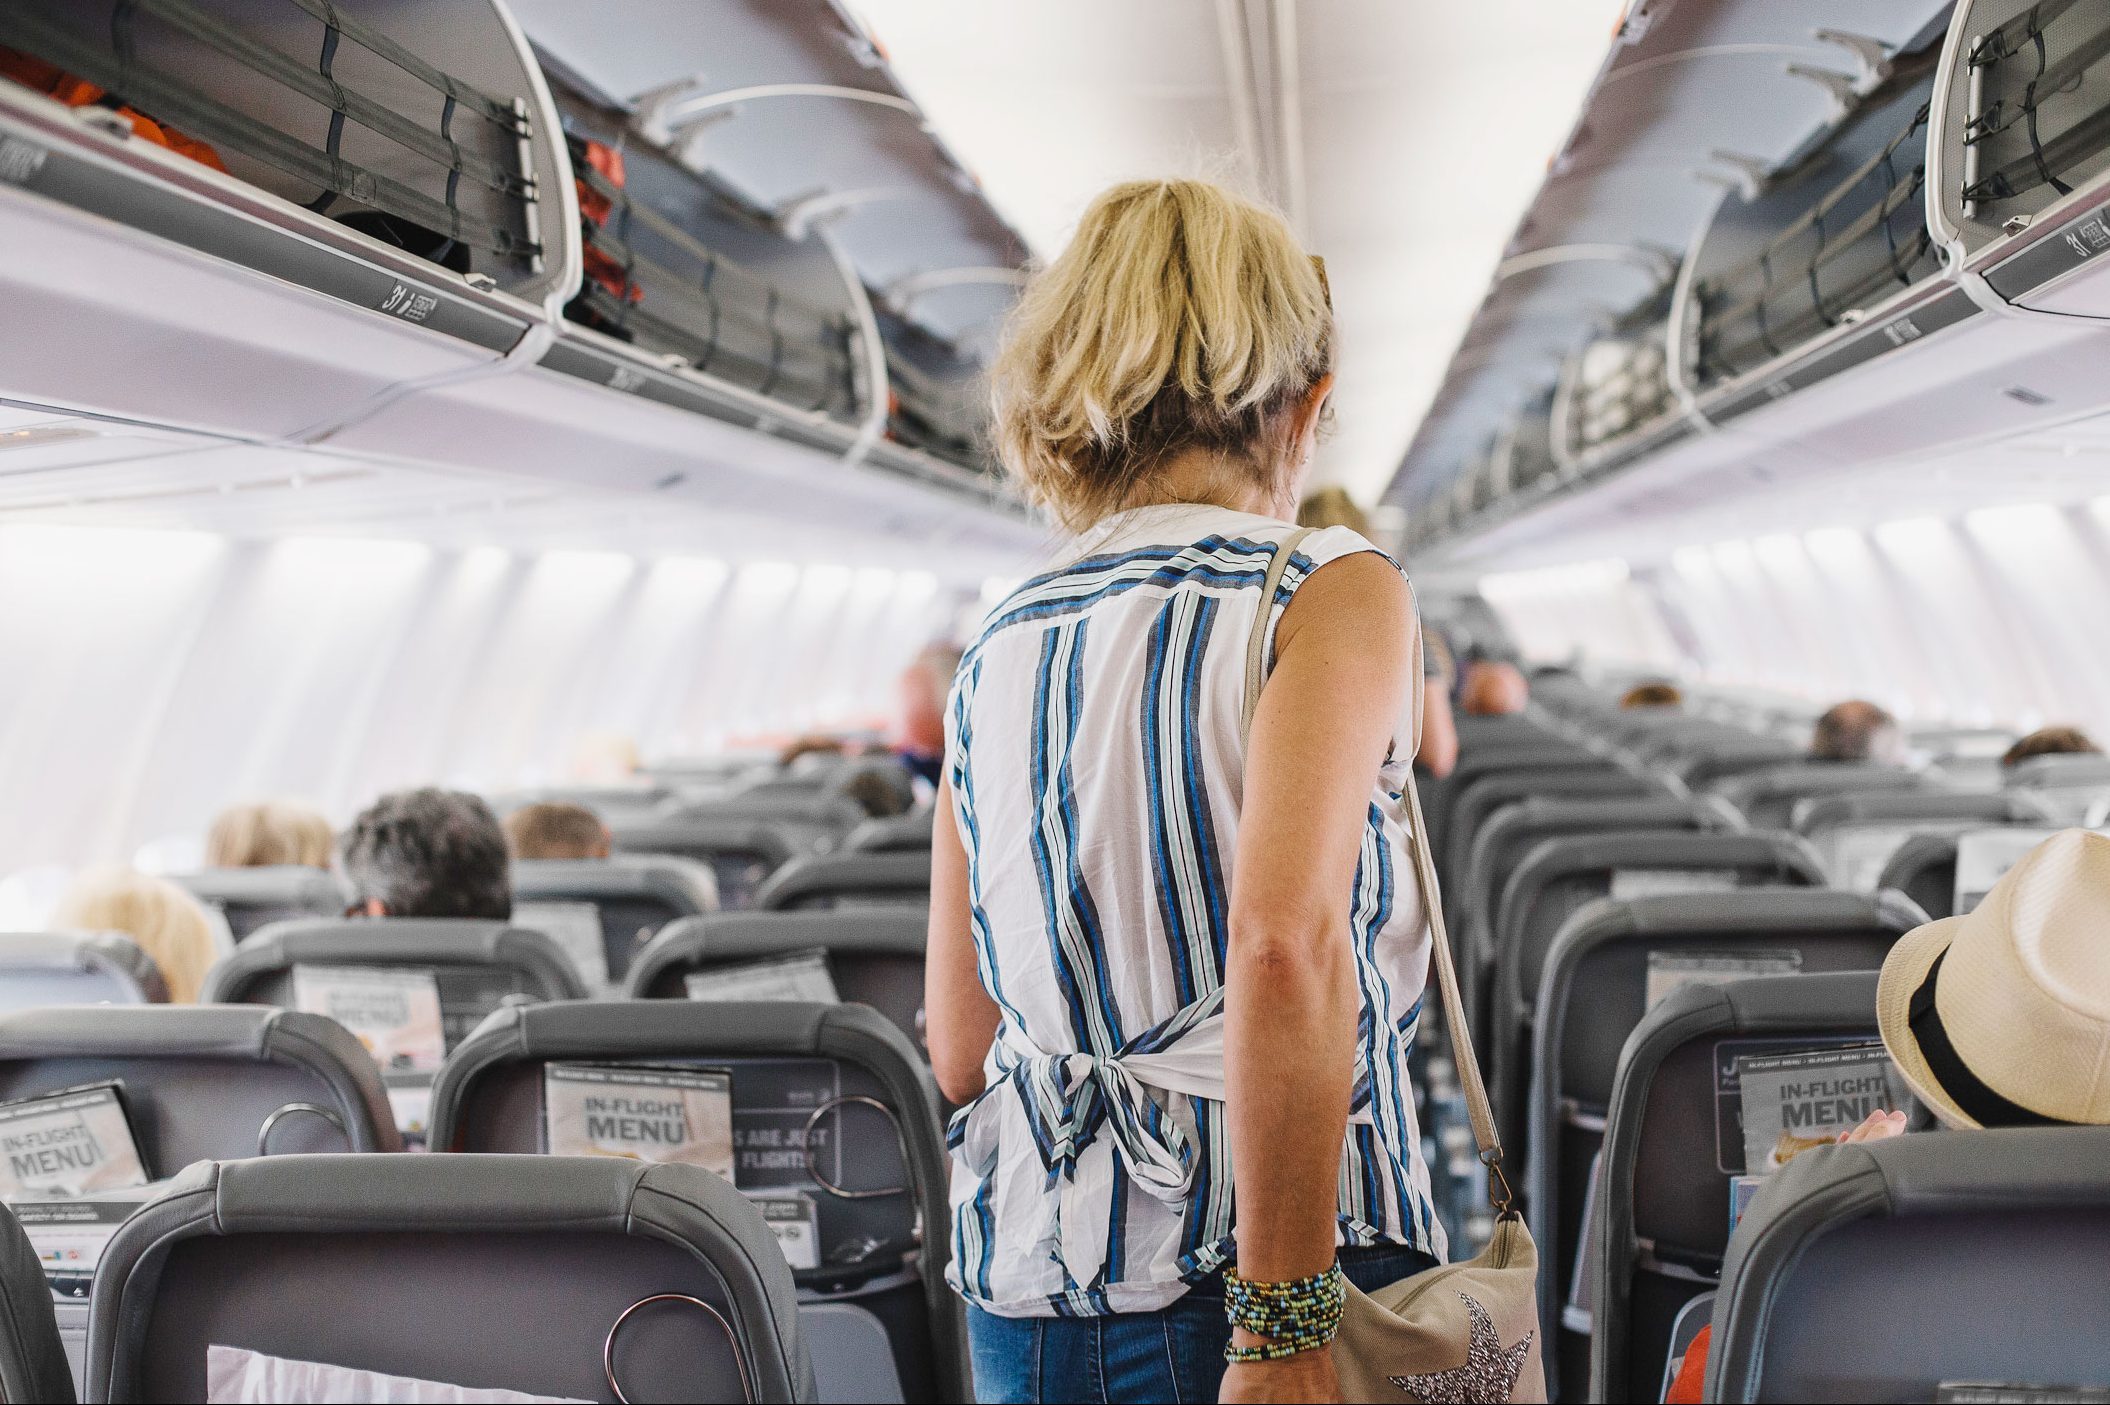 <p>One of Alisha's pet peeves is passengers who see their seat assignment as a suggestion, not a rule. It's never open seating, so just sit in your assigned <a href="https://www.rd.com/list/best-airplane-seats/" rel="noopener noreferrer">airplane seat</a>, she says. Swapping after everyone is seated—say, if you're a parent and want to sit next to your child—can be OK, though. At that point, you can politely ask a flight attendant to assist you for a smoother transition.</p>